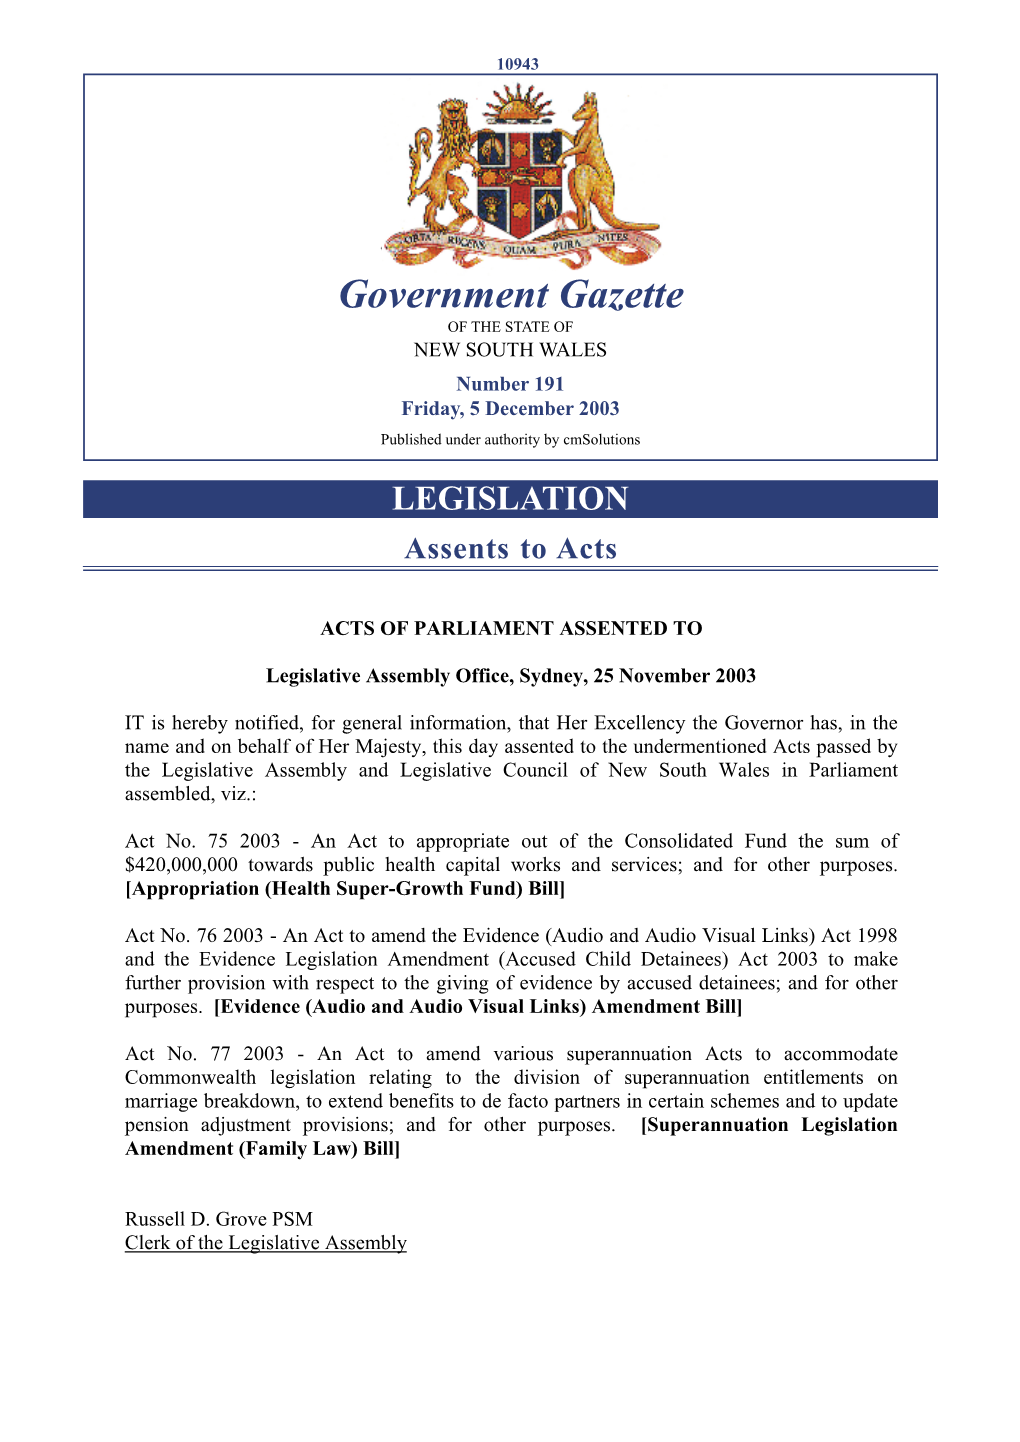 Government Gazette of the STATE of NEW SOUTH WALES Number 191 Friday, 5 December 2003 Published Under Authority by Cmsolutions